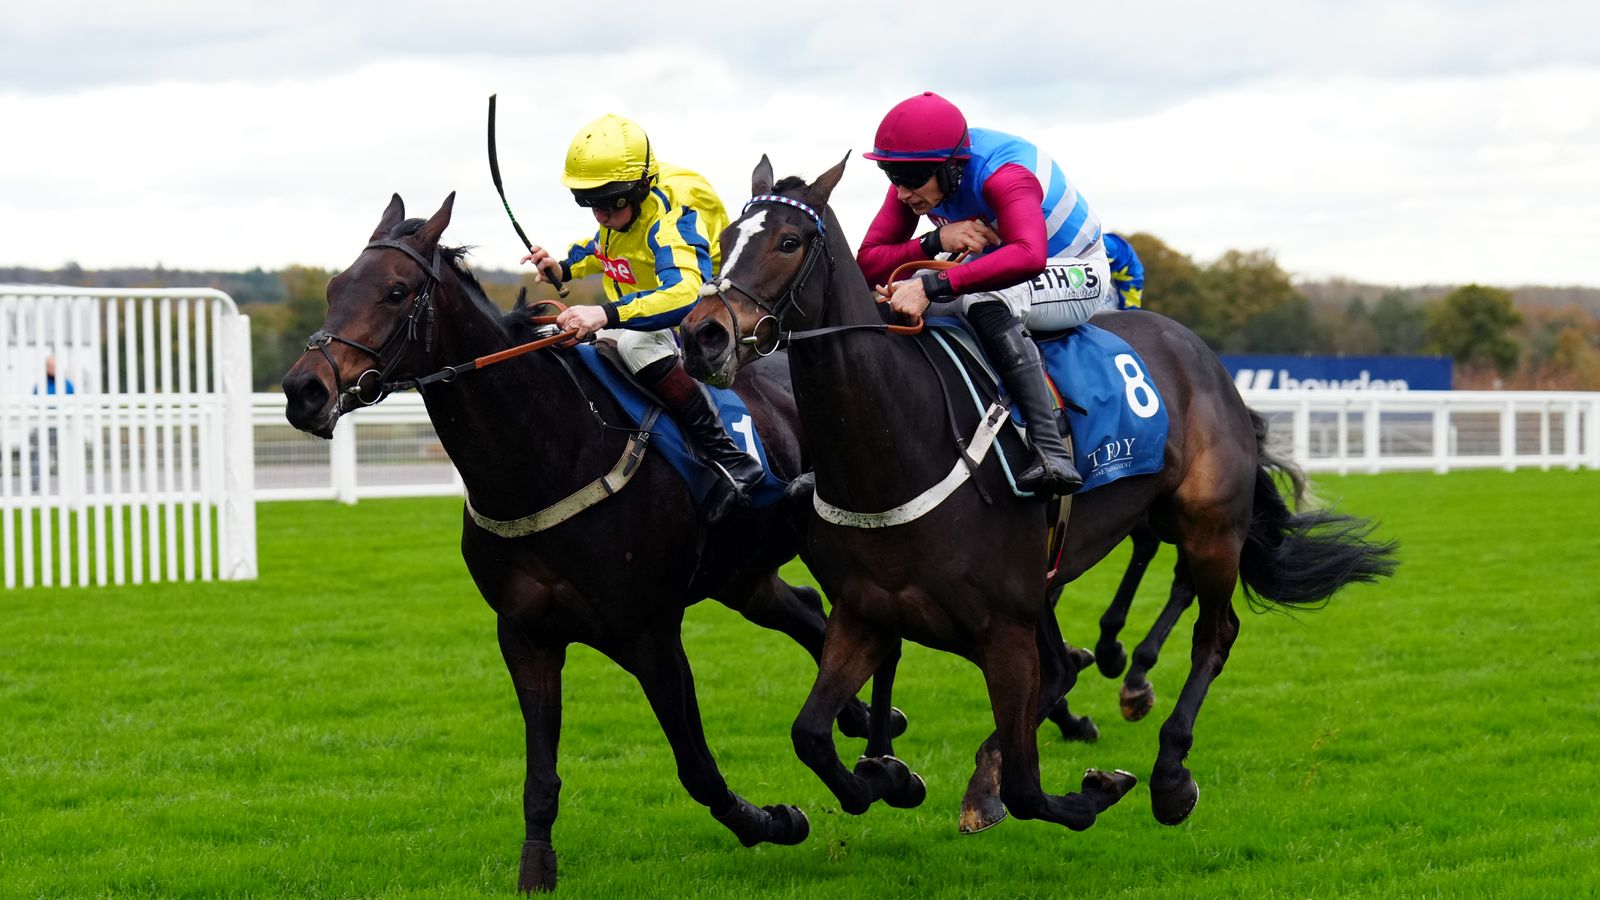 Ascot November Racing Weekend: Adrian Heskin lands a double while Your Darling delivers in style for Ben Pauling